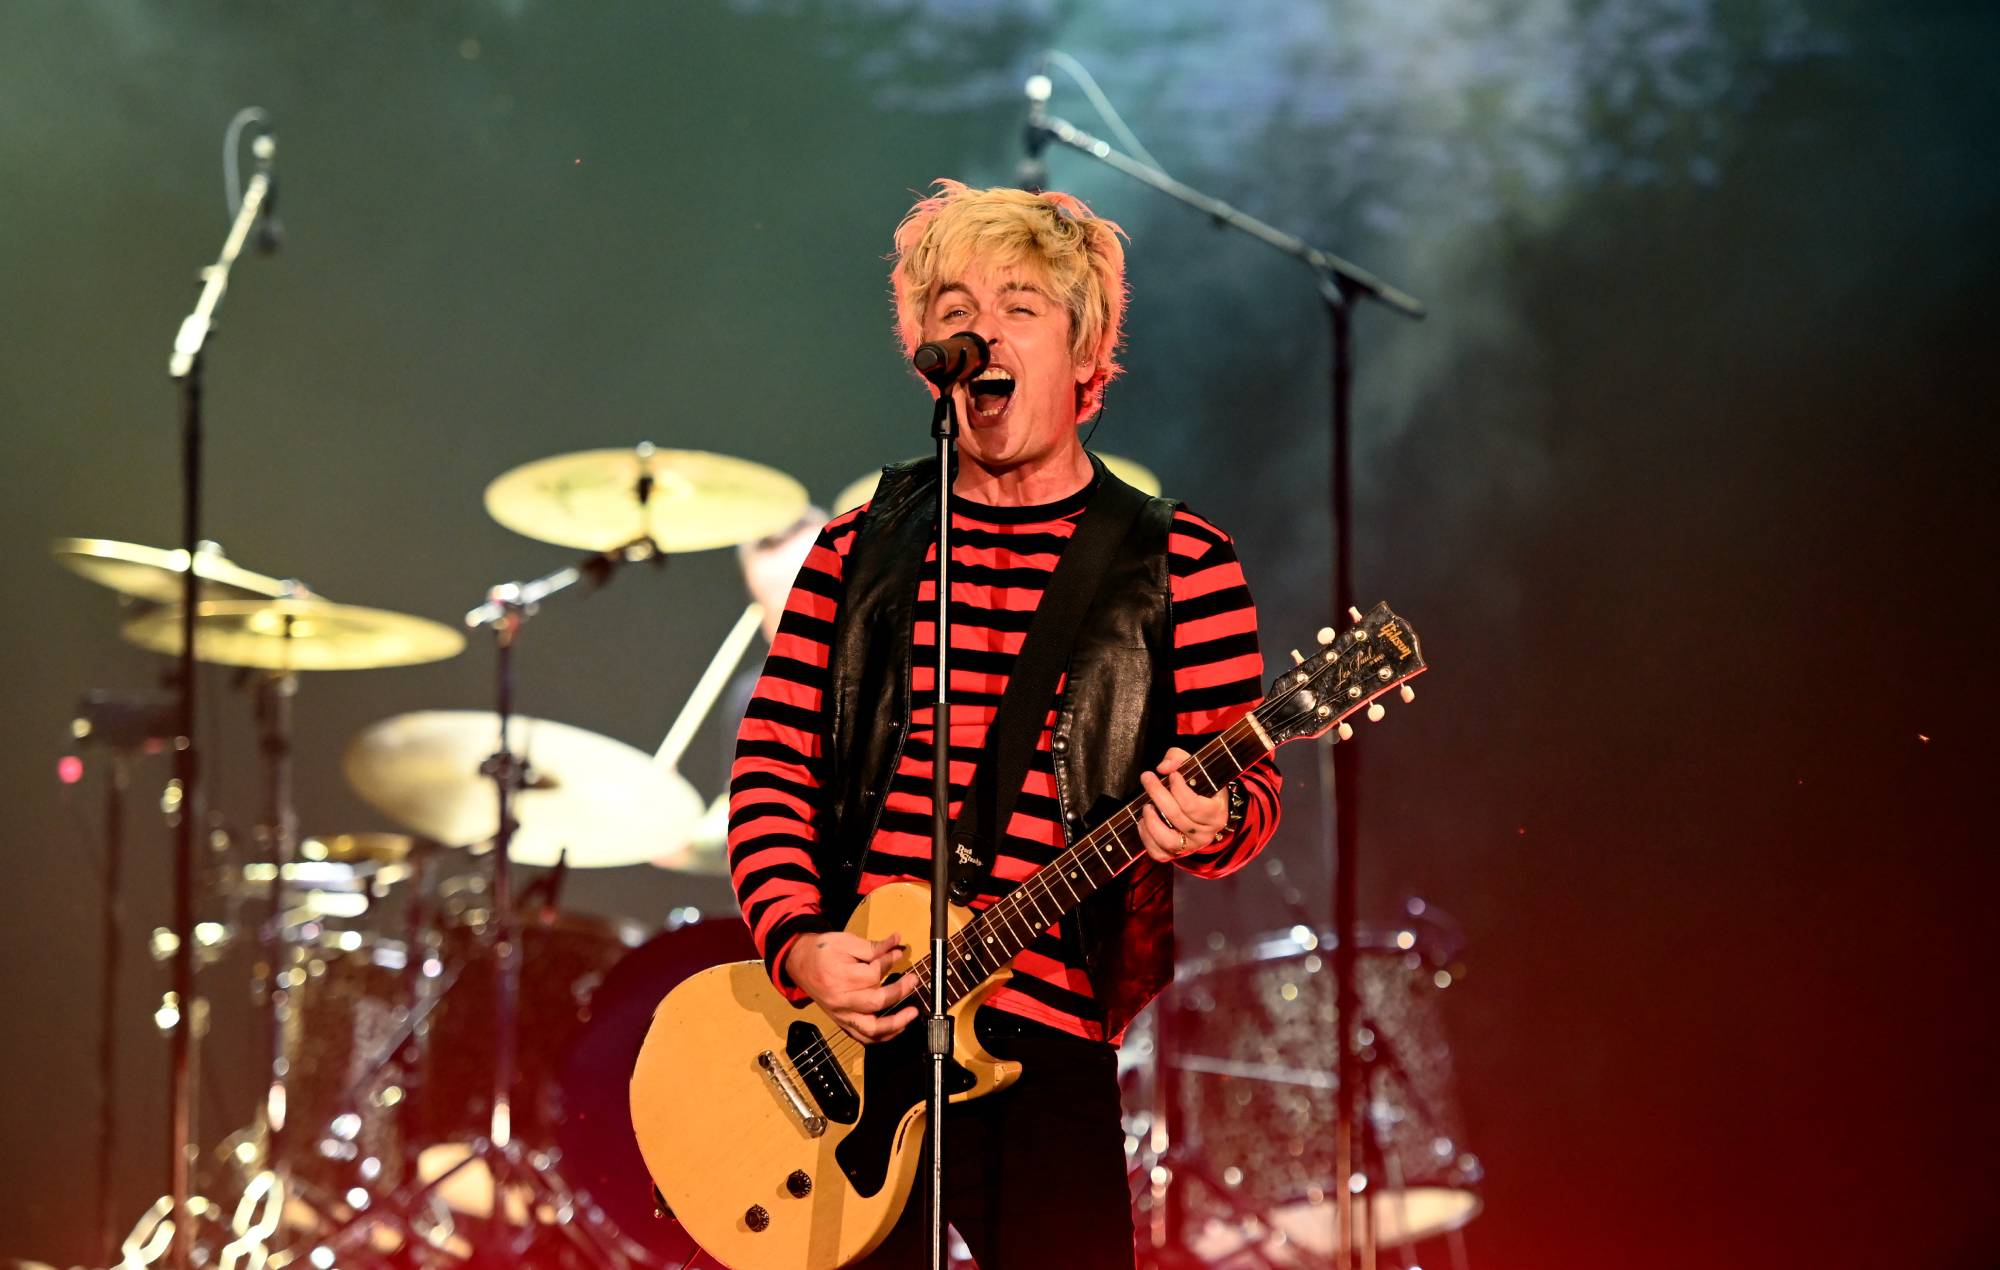 Green Day appear to be teasing new music in cryptic social media post